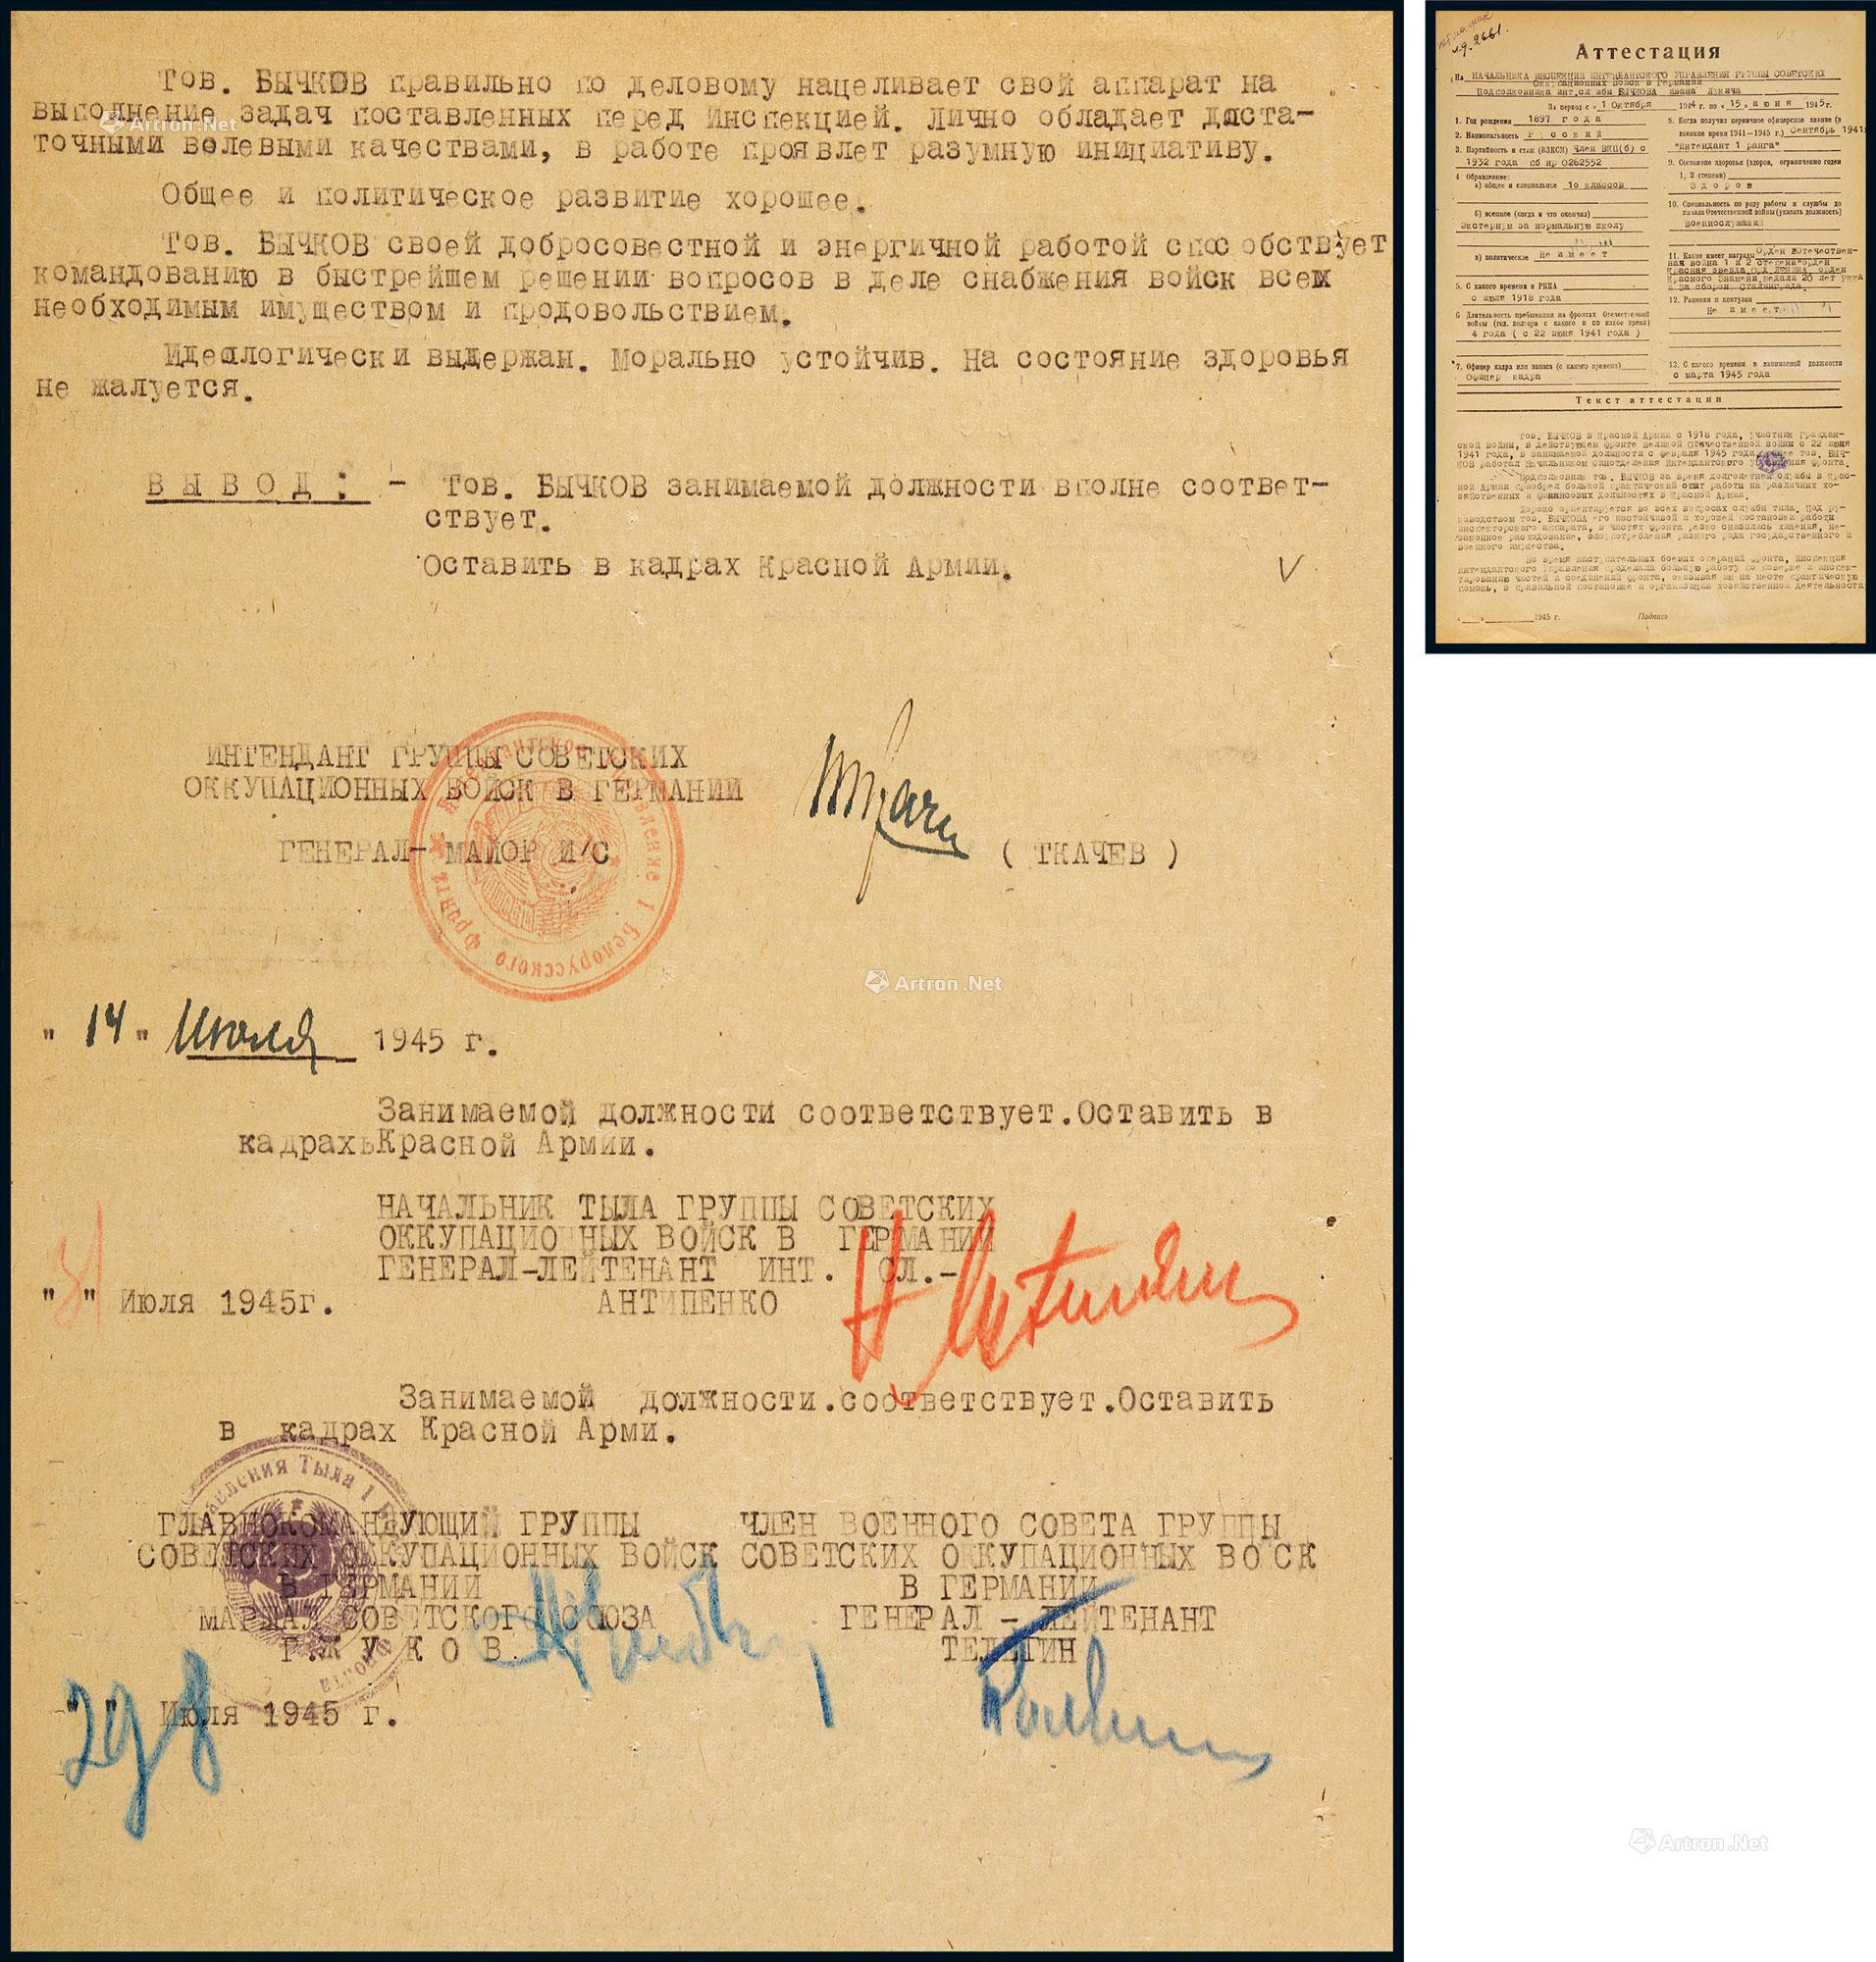 Document autographed by the Grand Marshal of the Soviet Union during World War II Georgy Zhukov